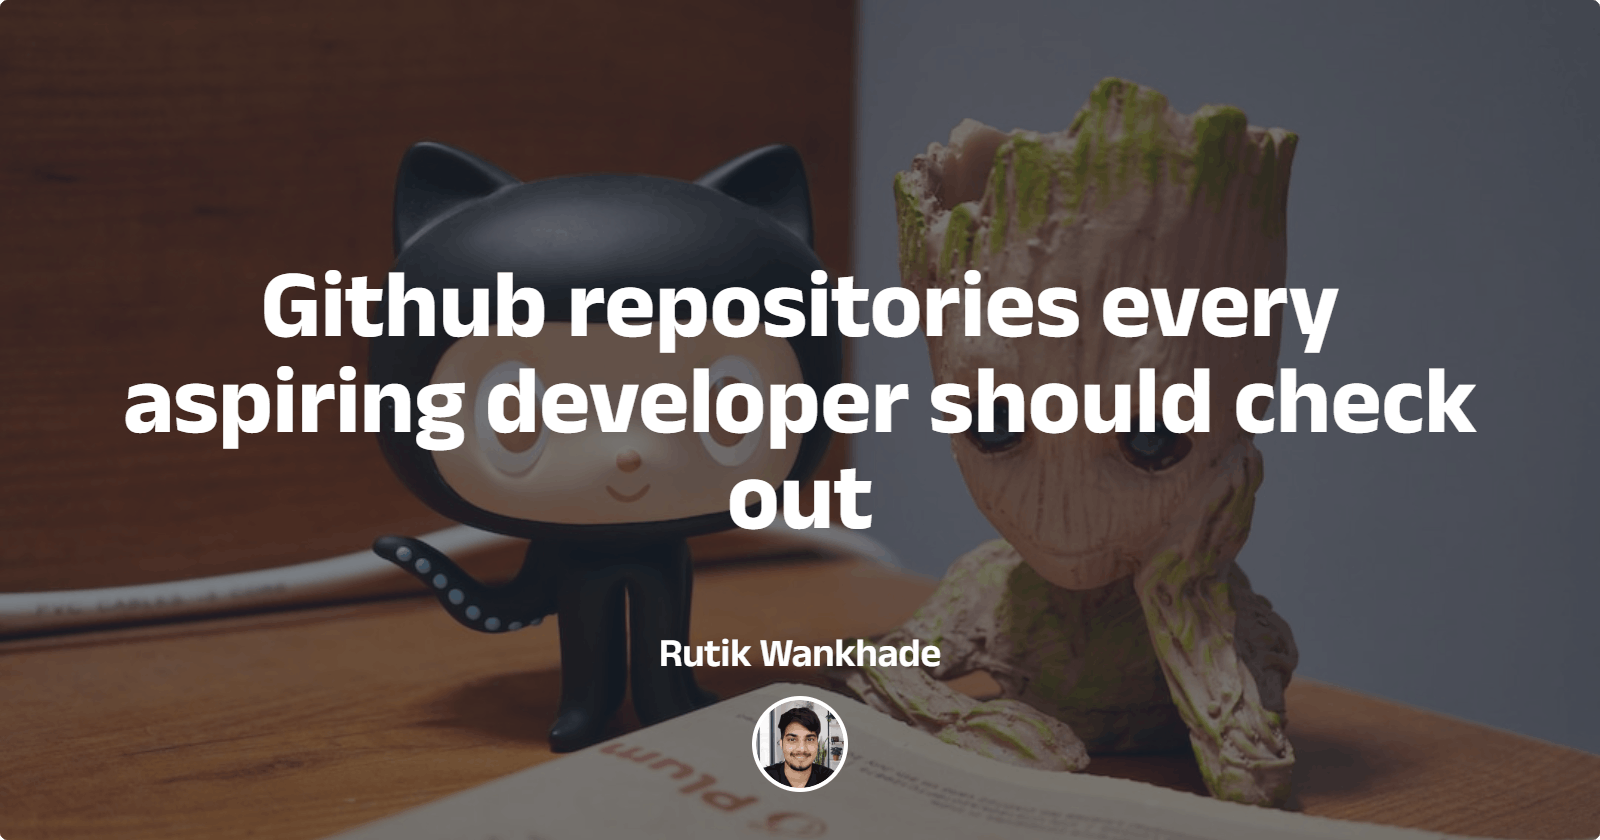 Github repositories every aspiring developer should check out